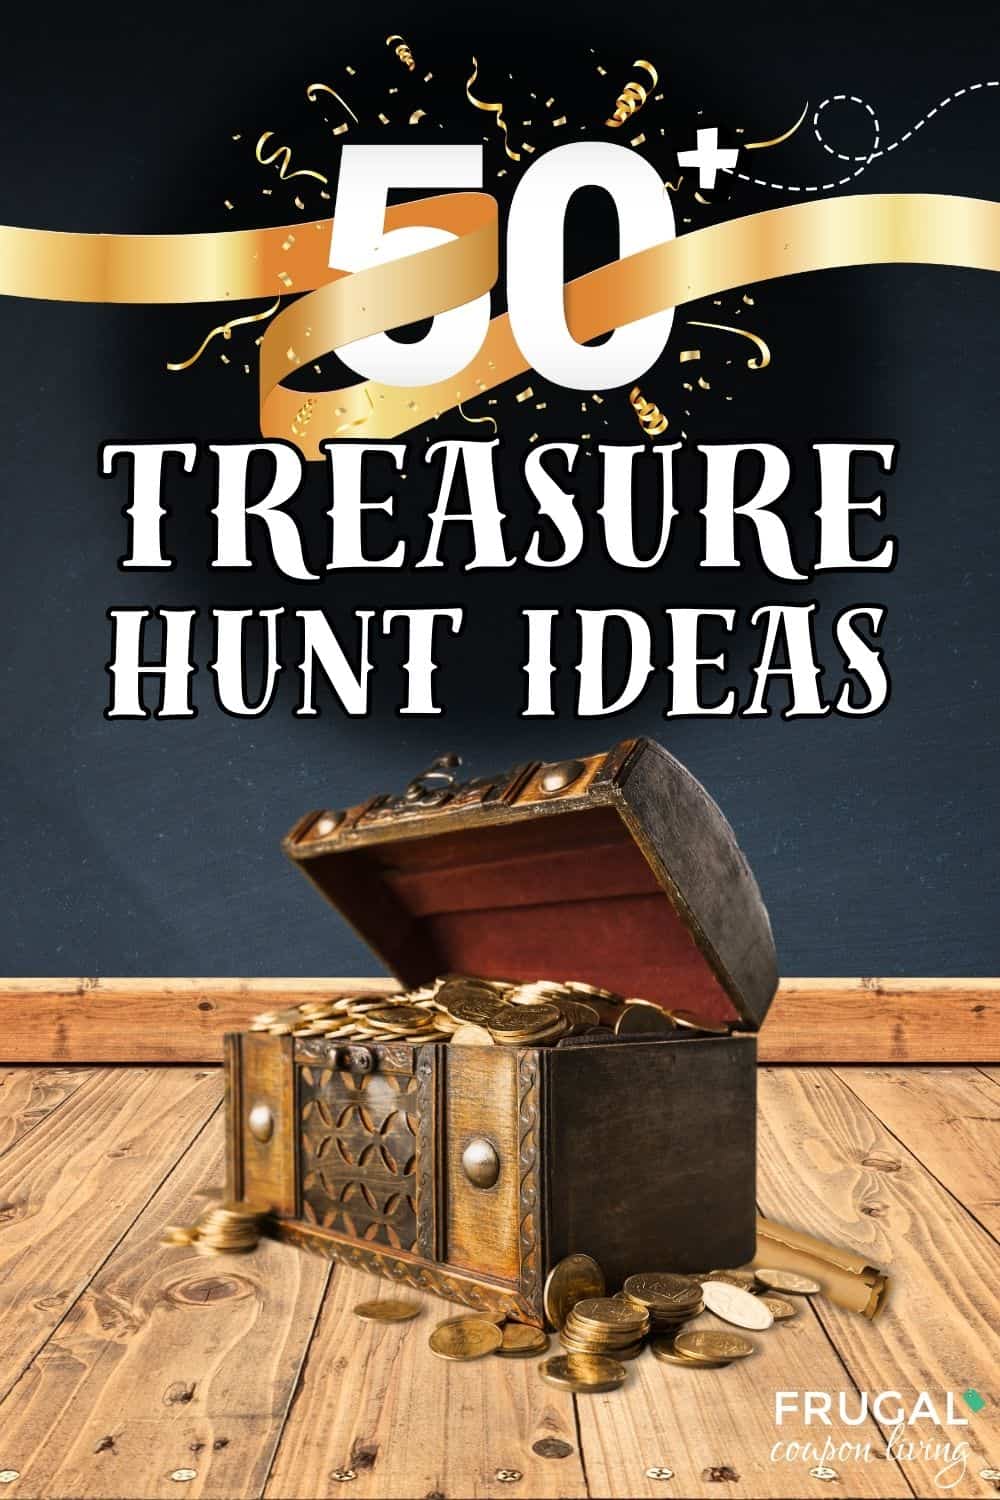 over 50 super fun treasure hunt ideas for adults and kids